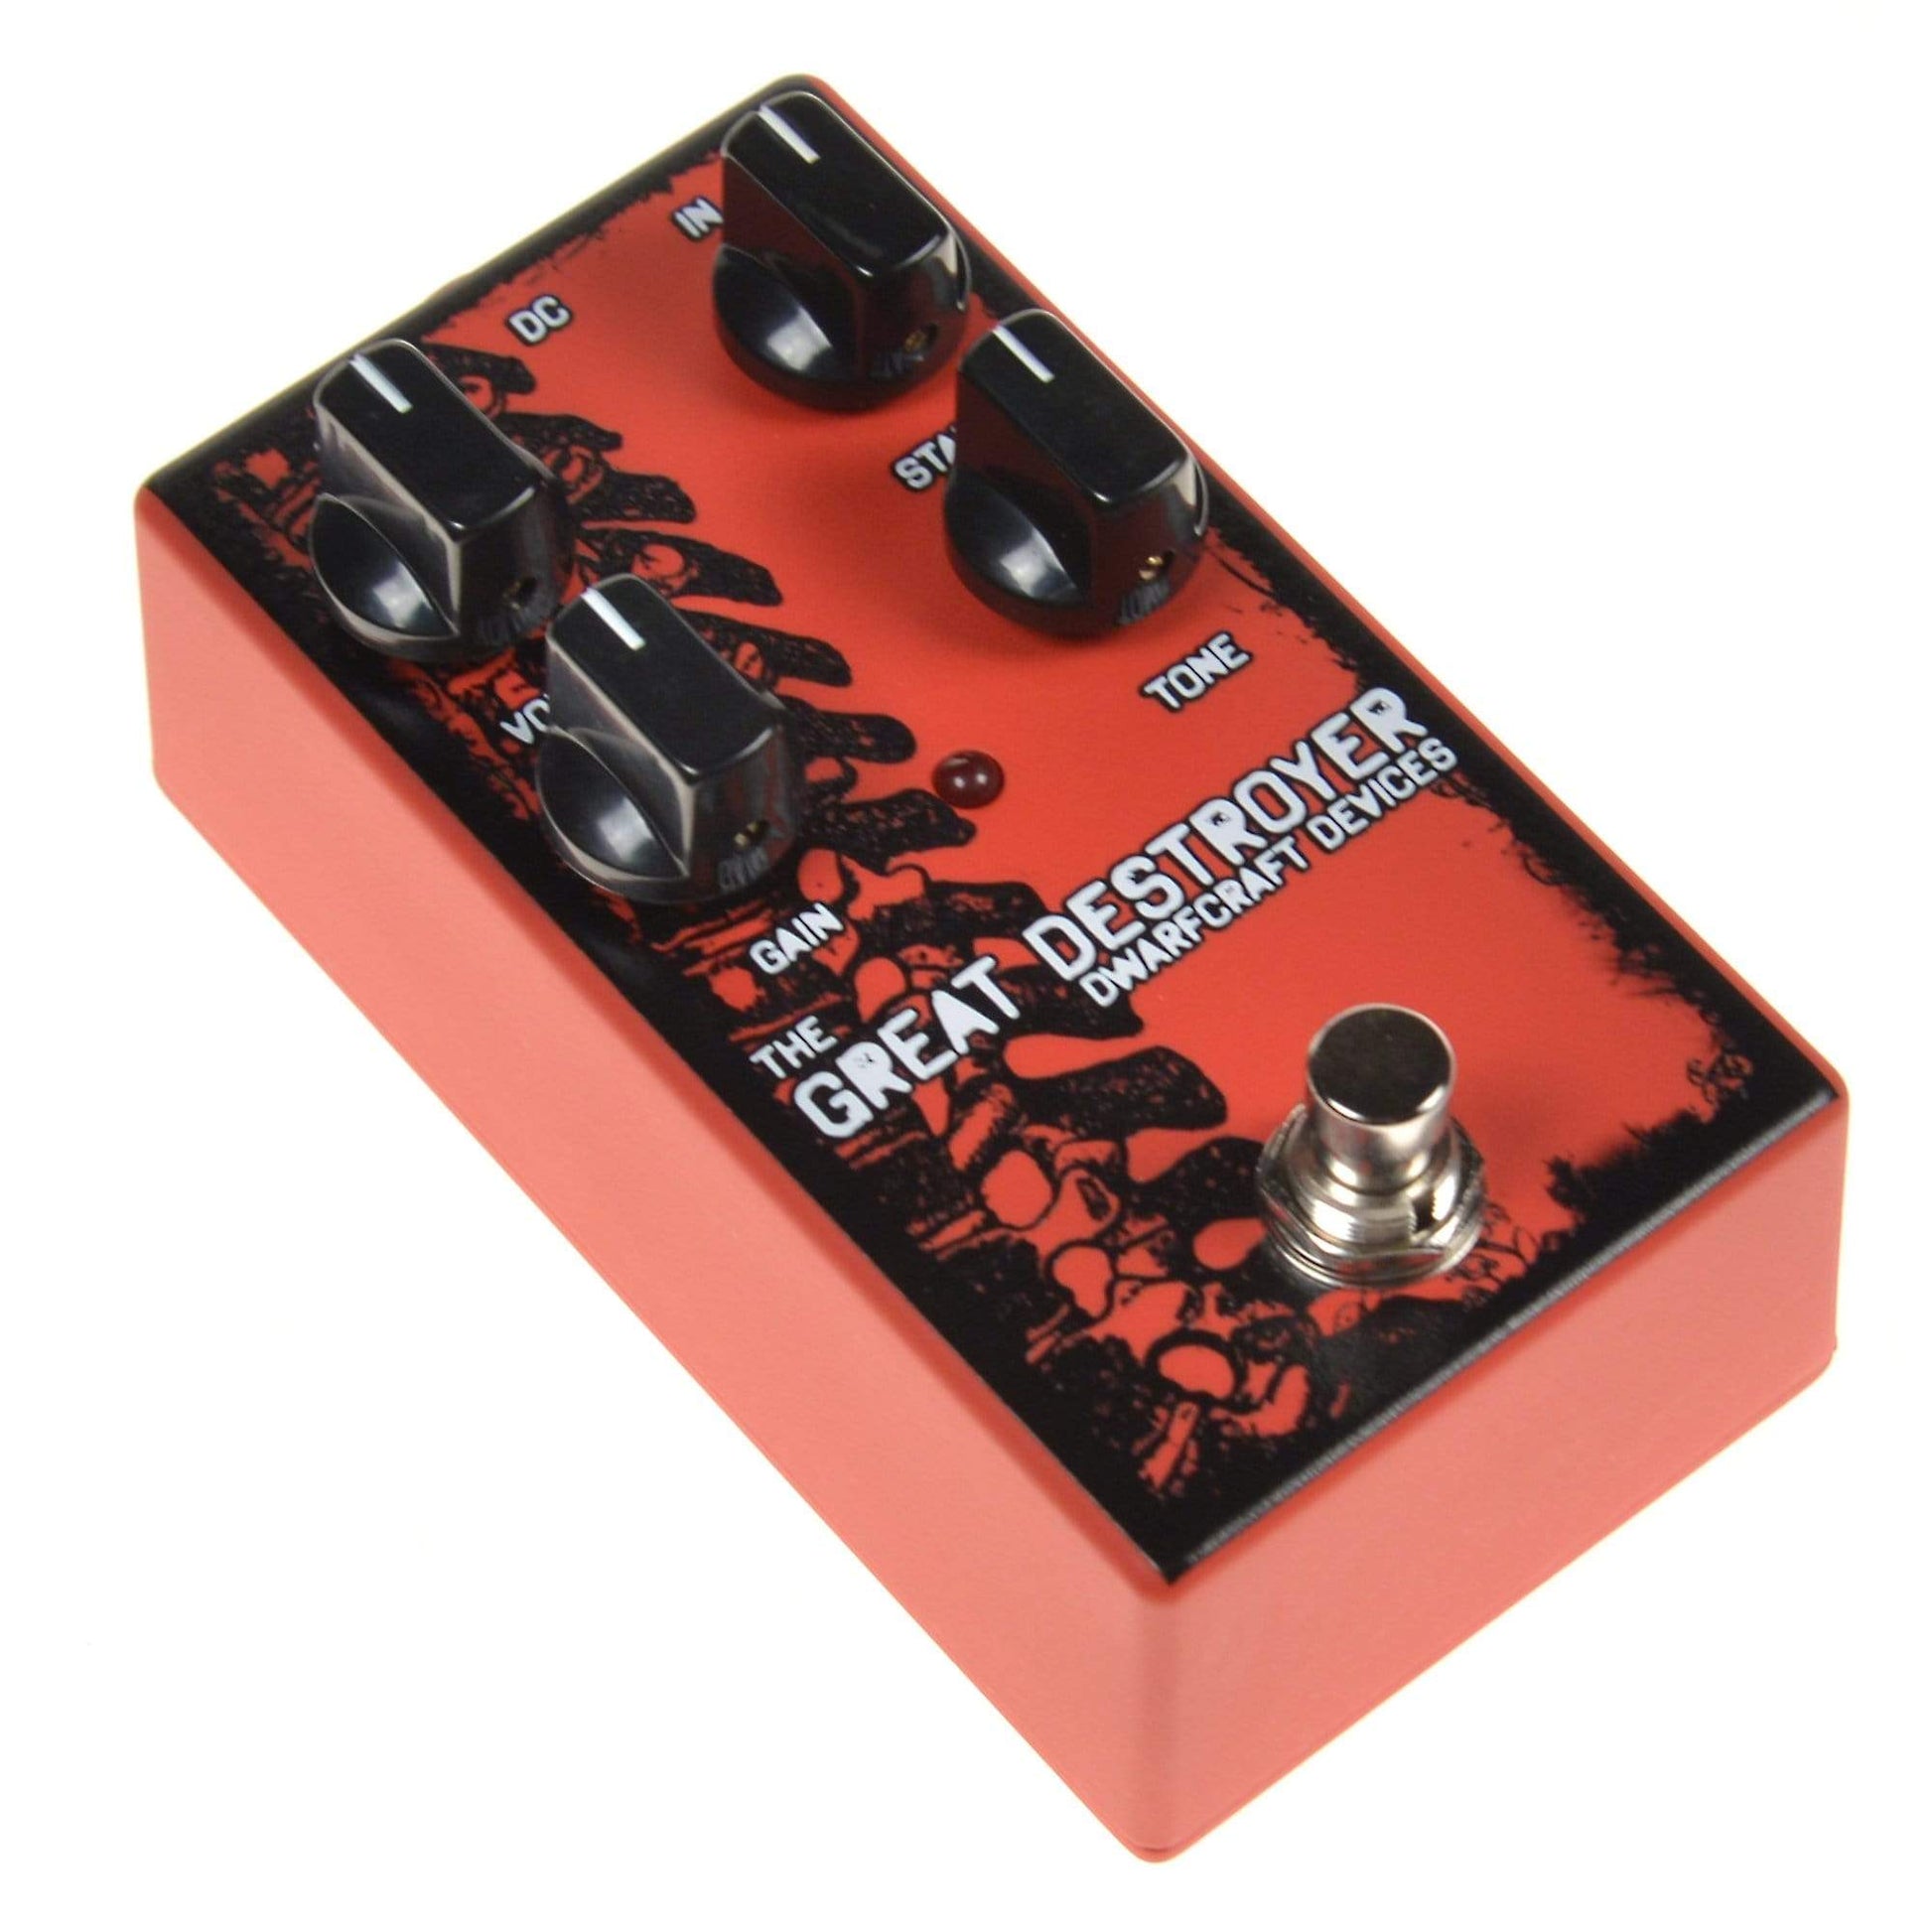 Dwarfcraft Devices The Great Destroyer Rhythmic Oscillation and Industrial Fuzz v2 Effects and Pedals / Fuzz